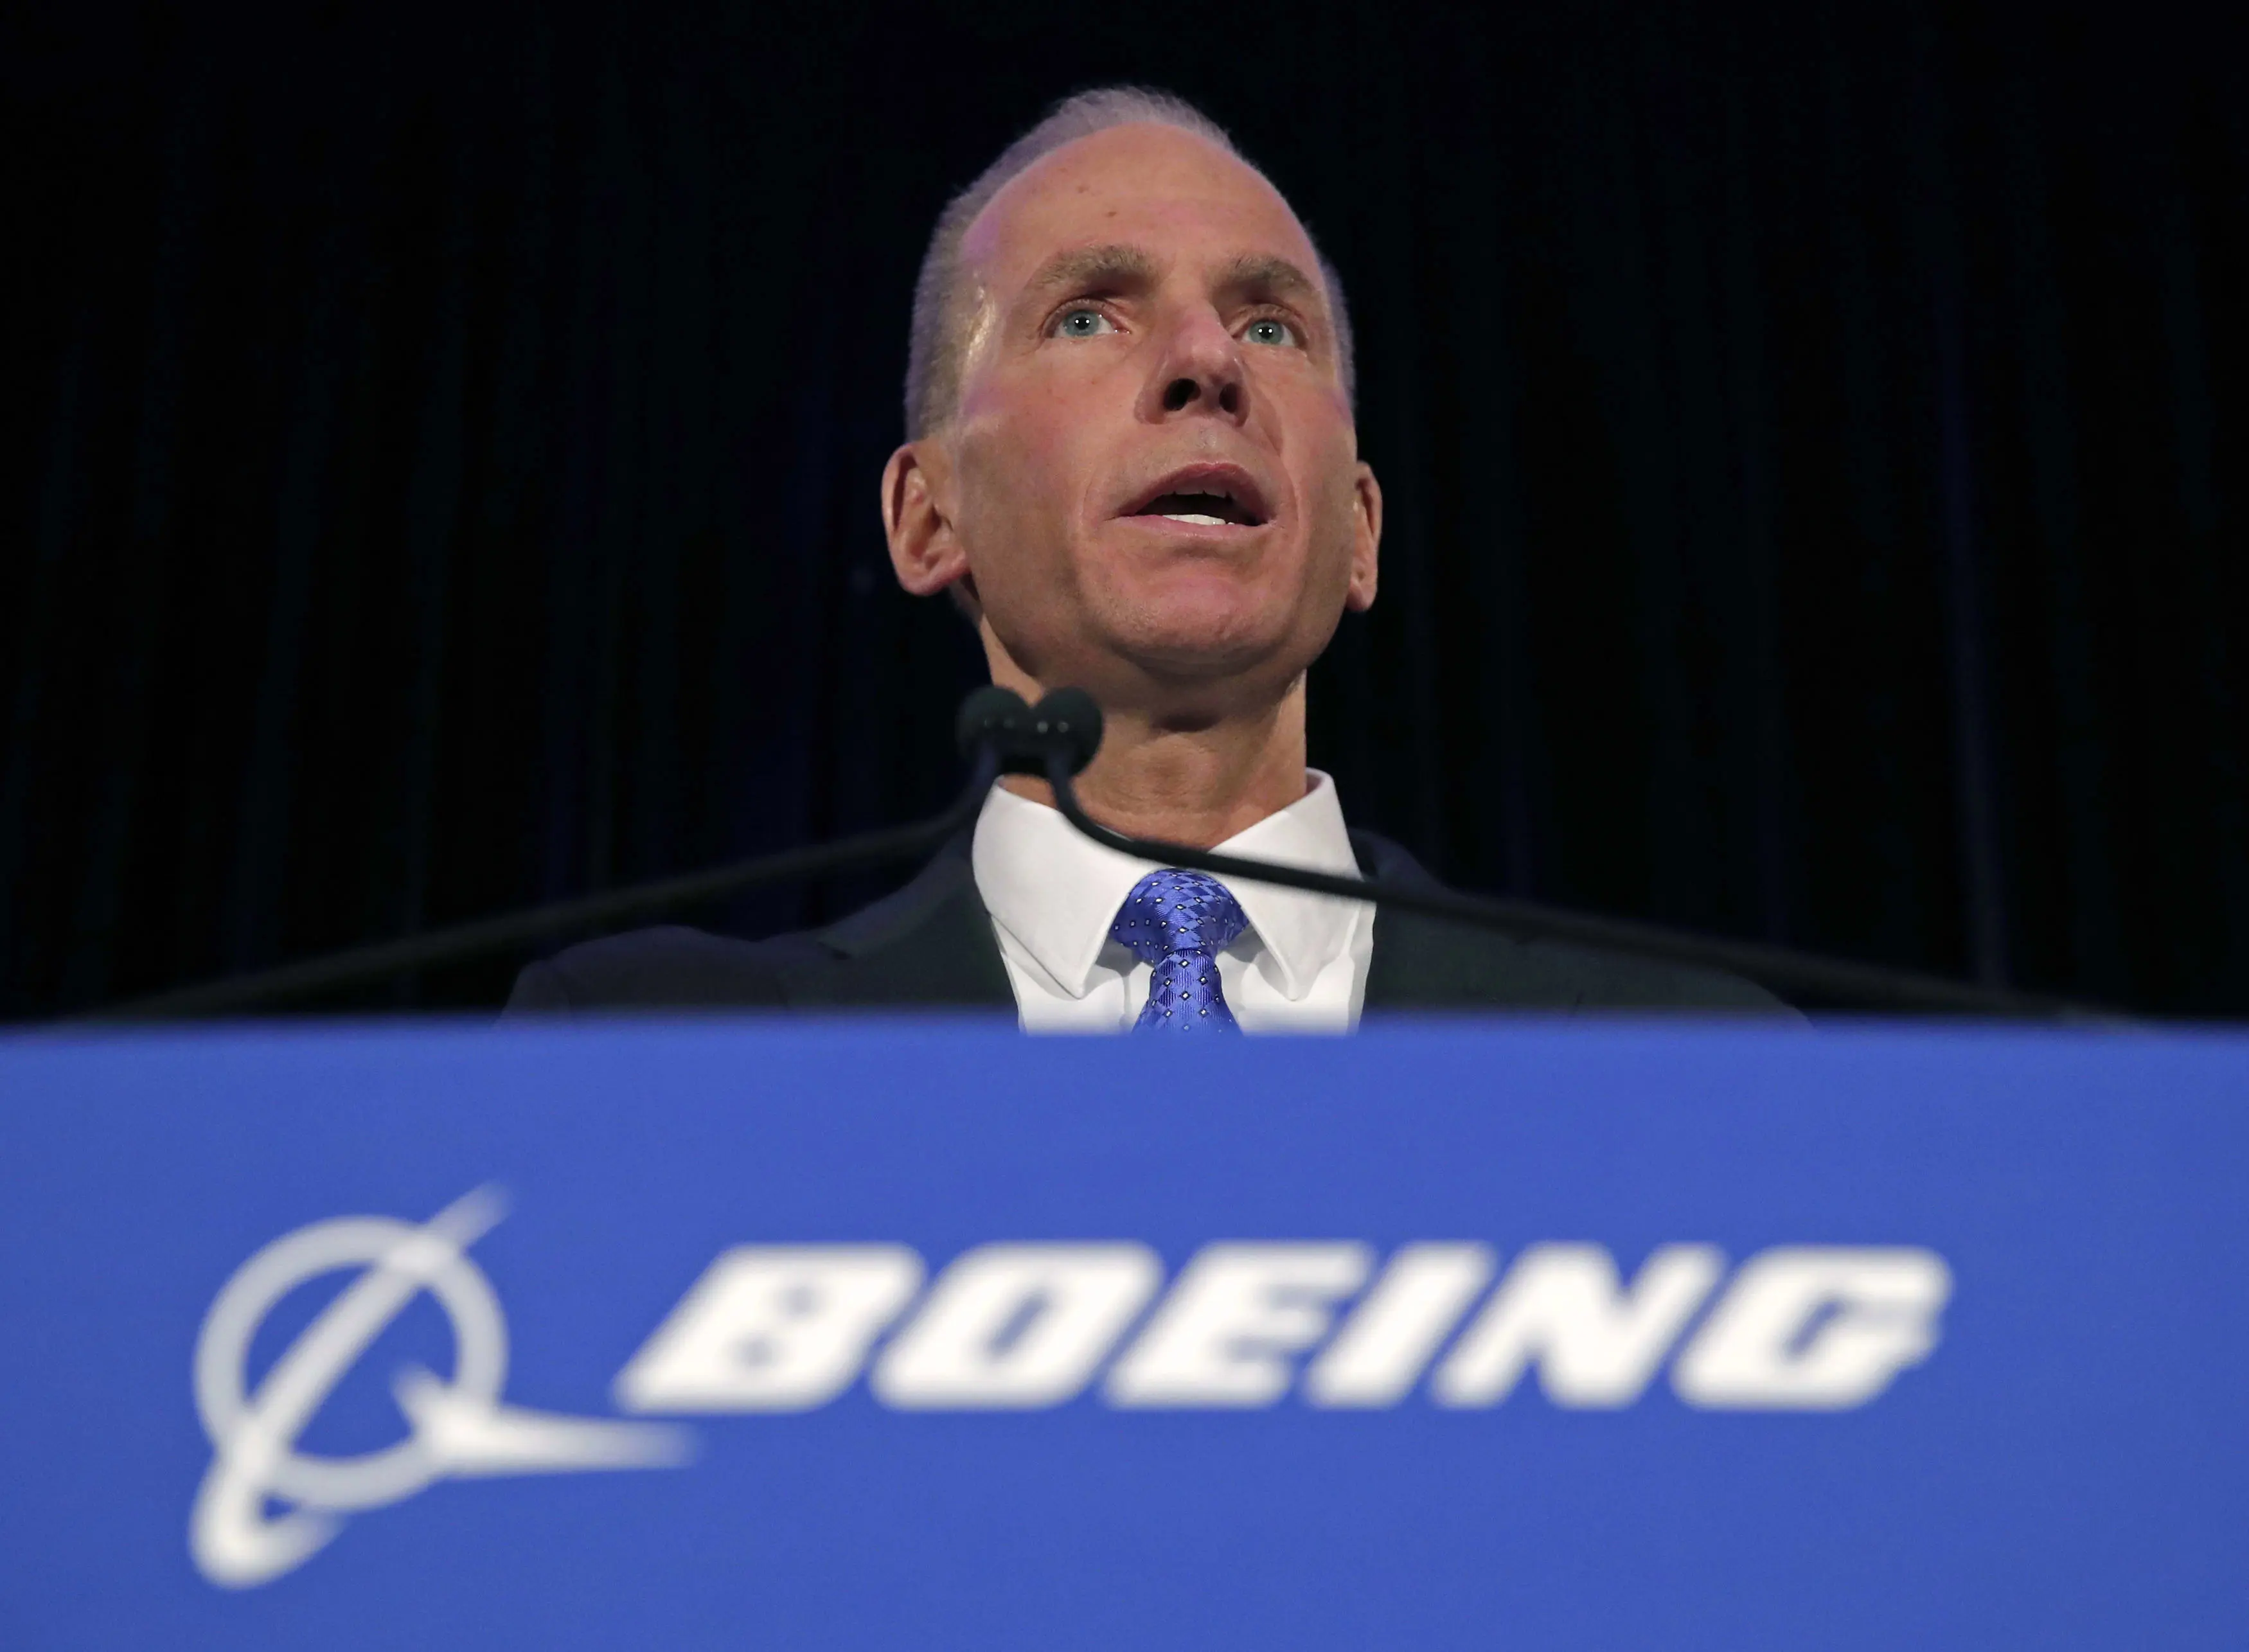 Boeing CEO loses chairman role after 737 MAX certification review